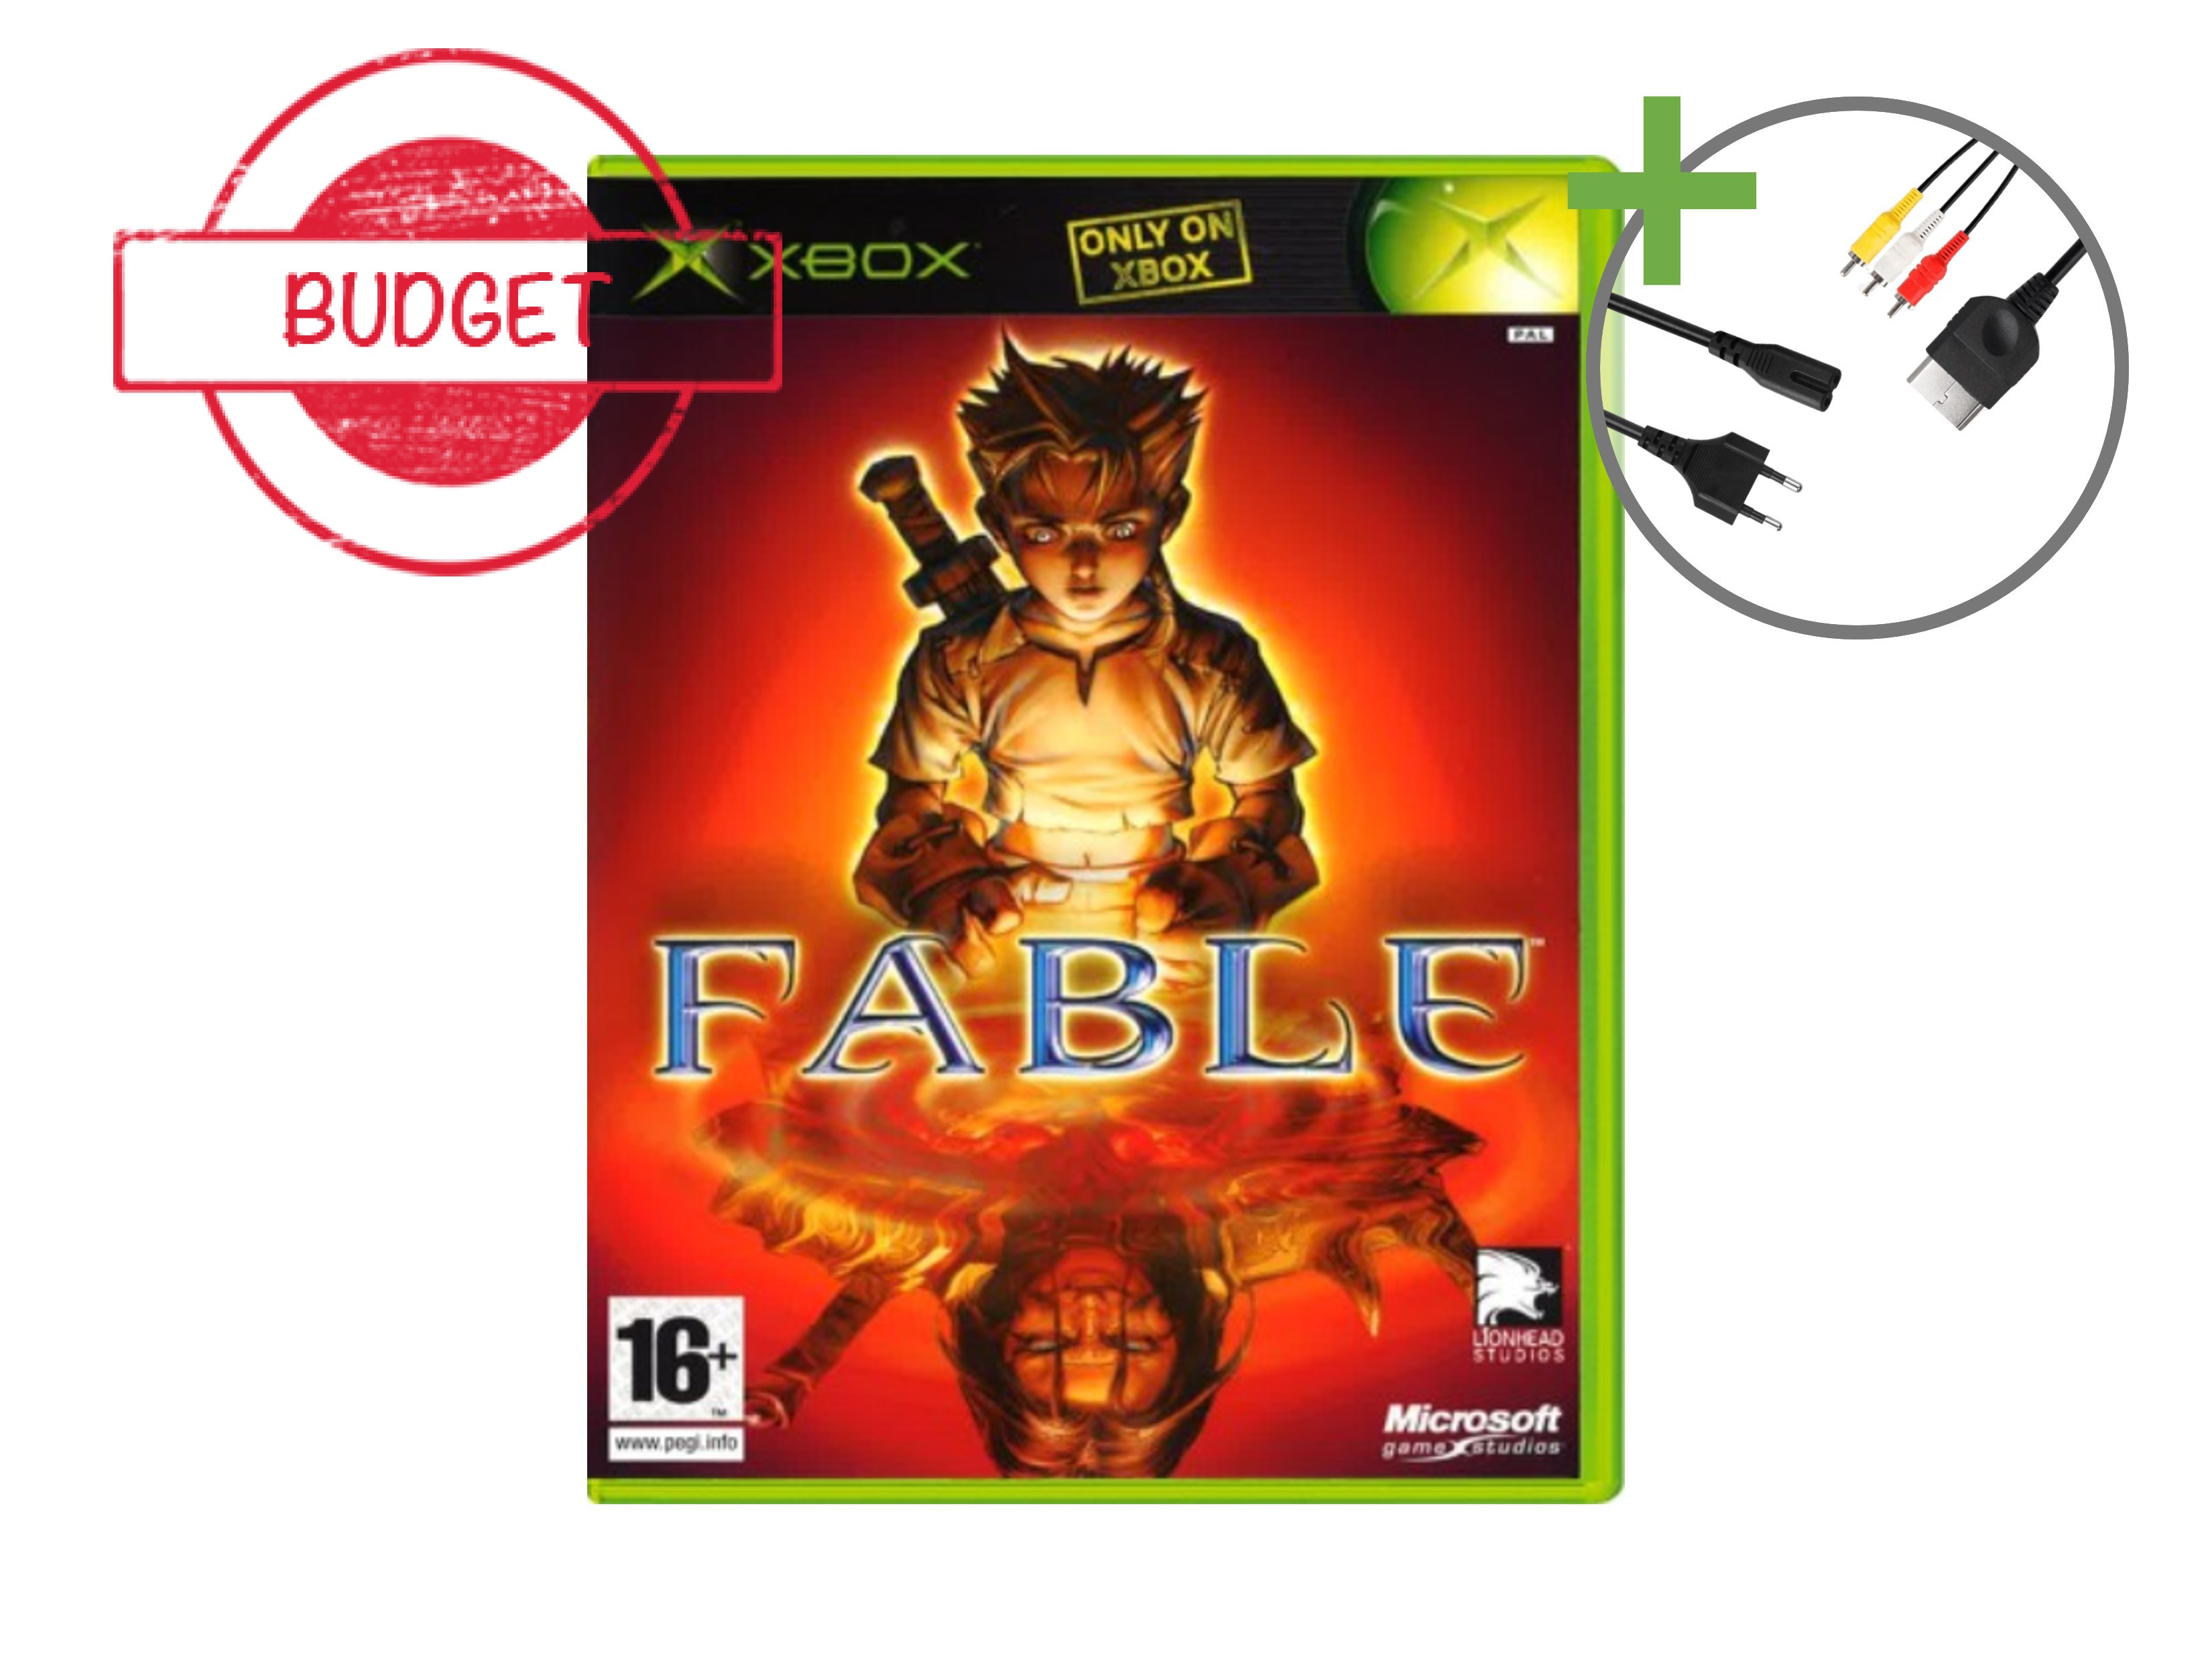 Microsoft Xbox Classic Starter Pack - Fable Edition - Budget - Xbox Original Hardware - 4